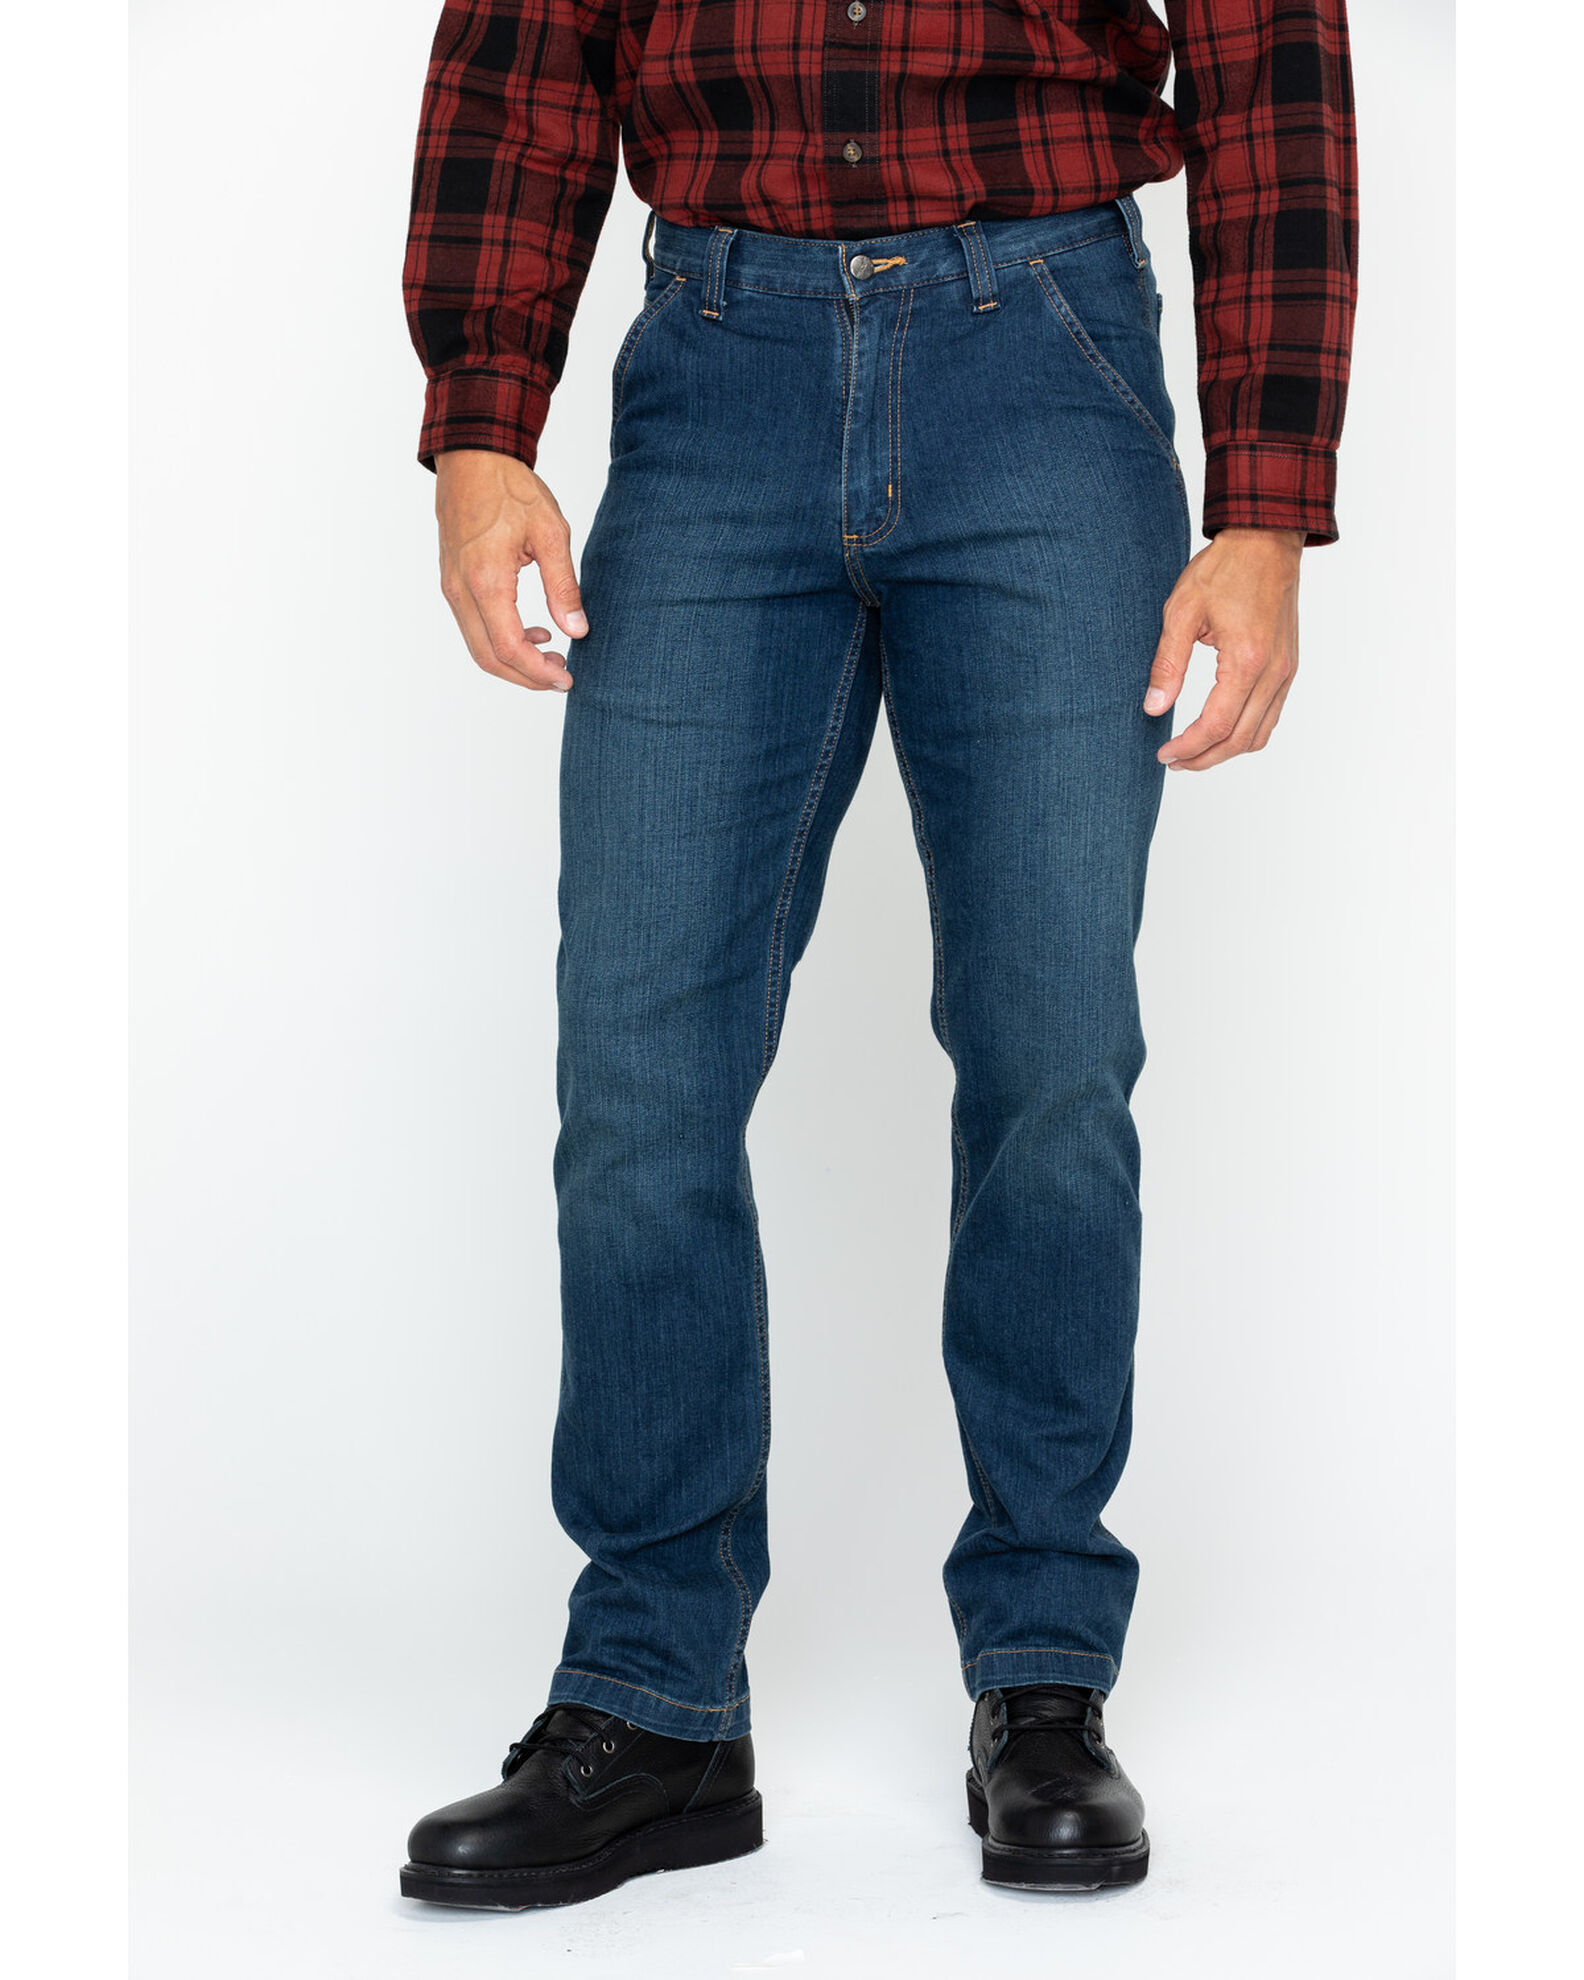 Carhartt Men's Full Swing Relaxed Fit Dungaree Jeans | Boot Barn